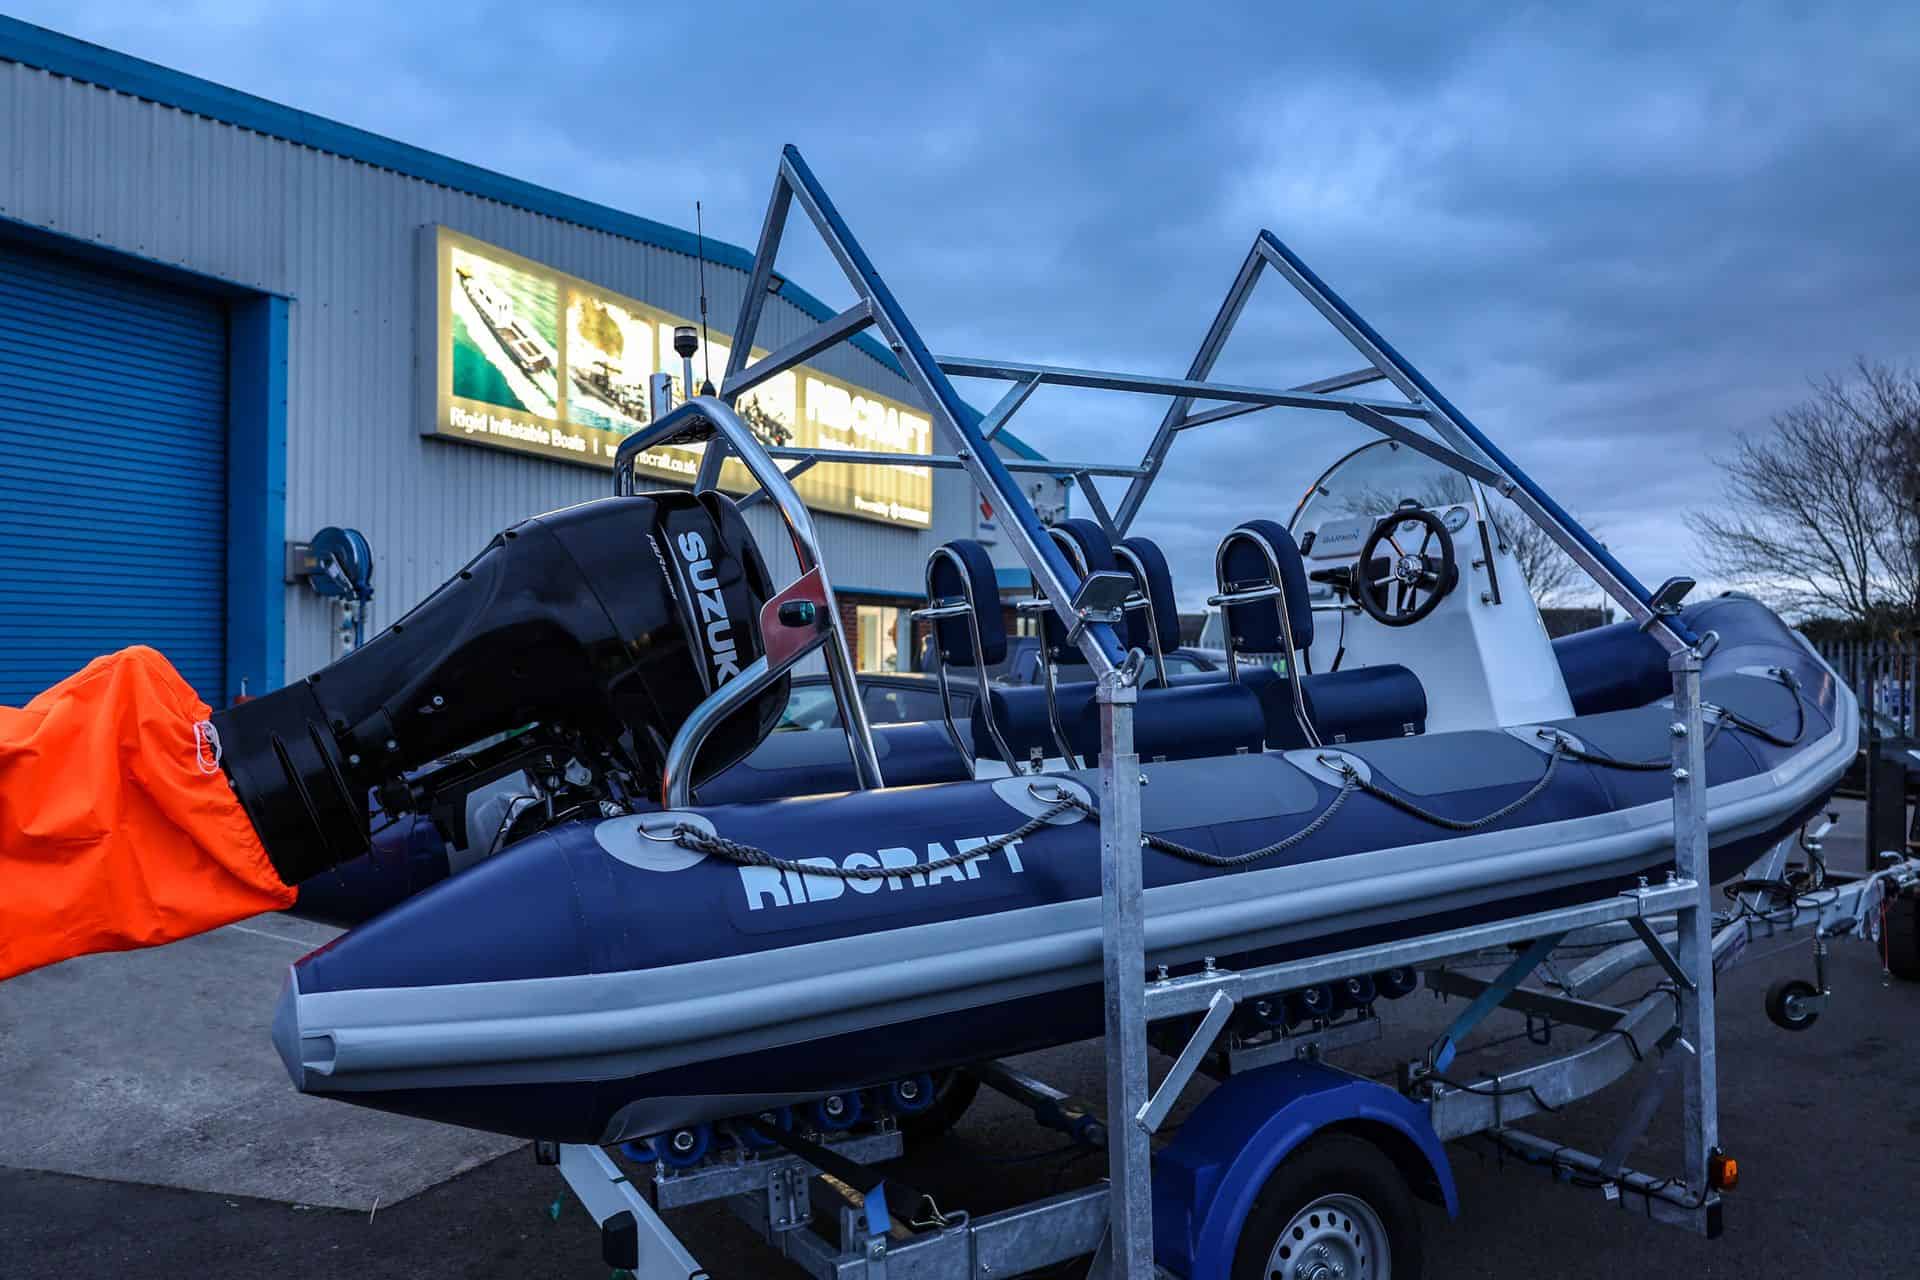 RIBCRAFT 5.3 PRO Suzuki 90 hp @ RIBs ONLY - Home of the Rigid Inflatable Boat